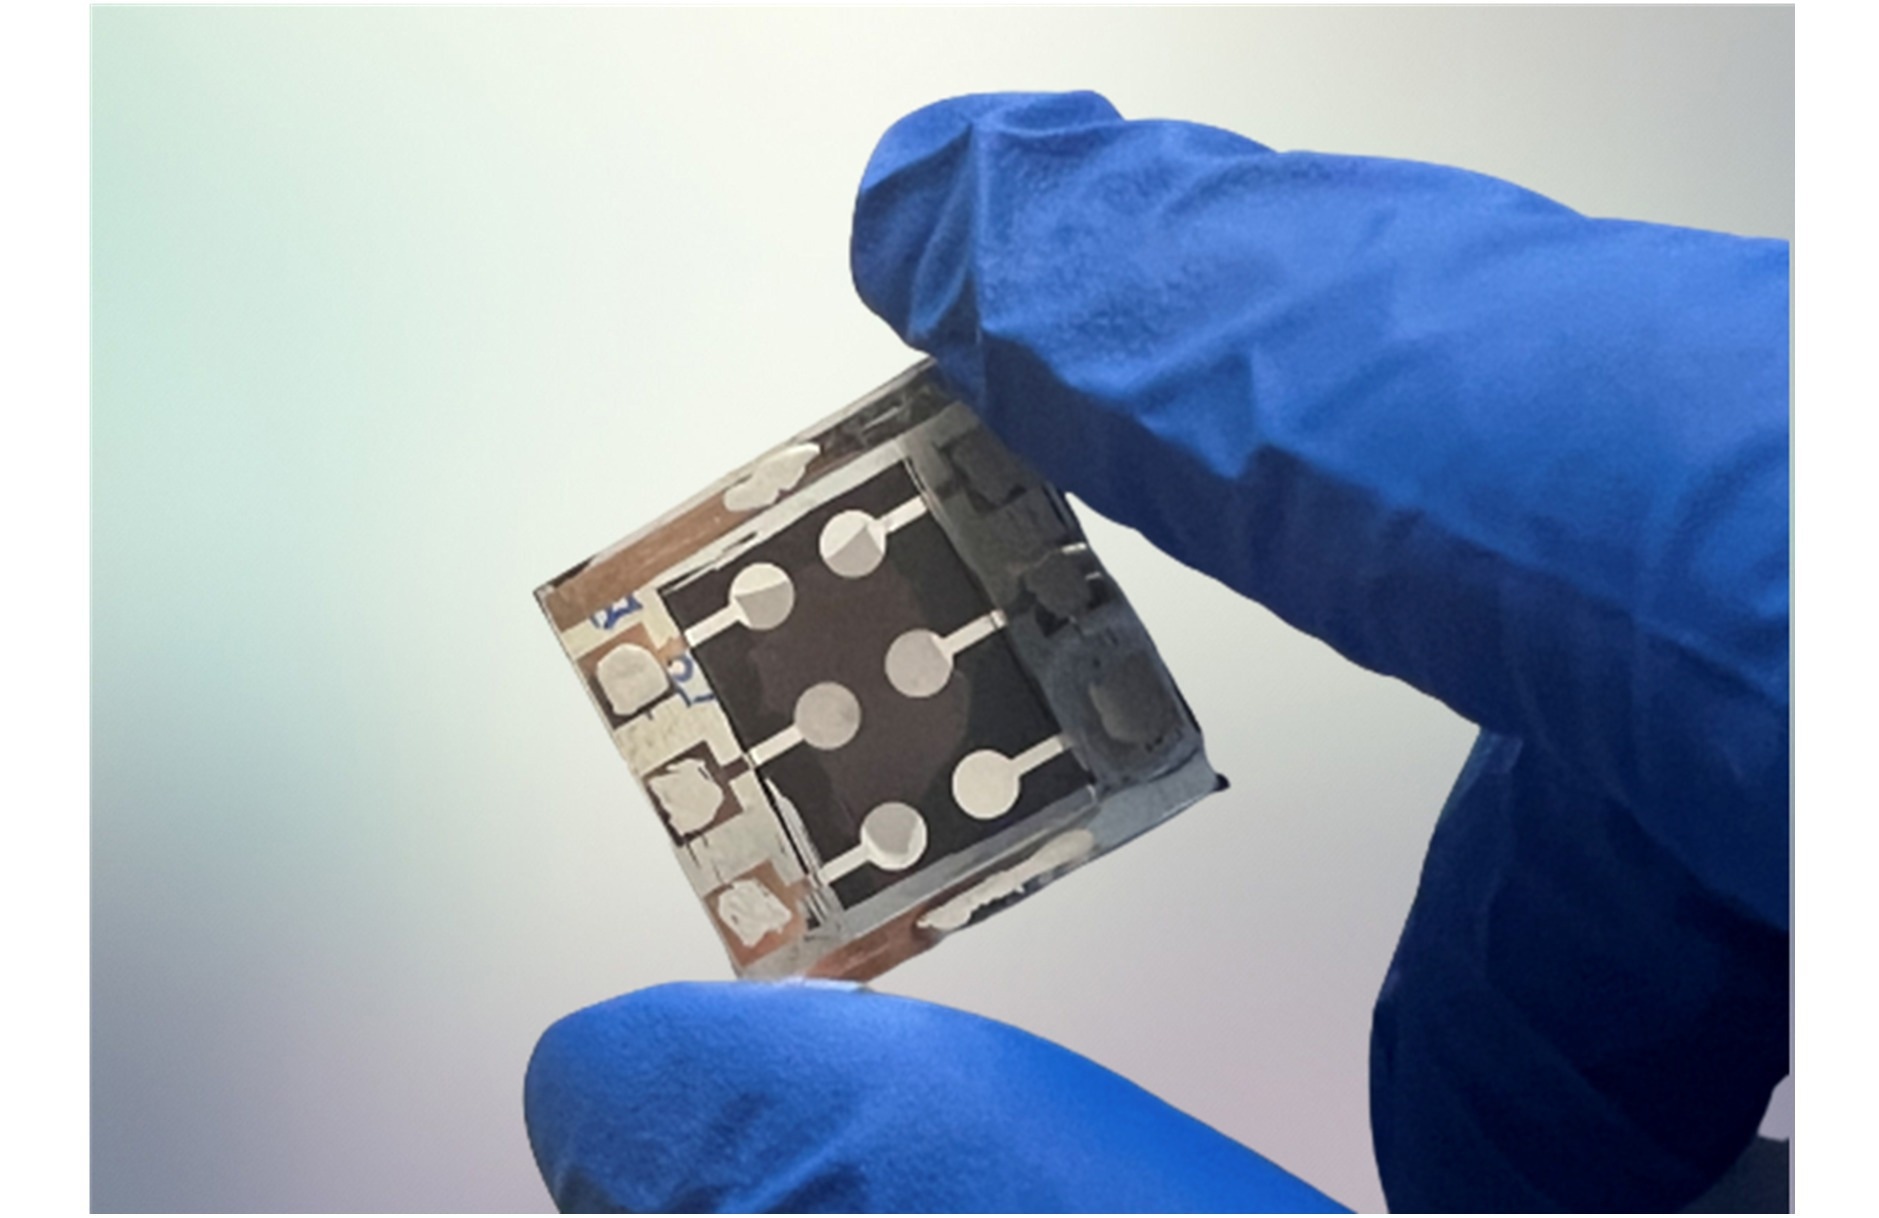 Addressing the Manufacturing Issues Associated With Perovskite Solar Cells.